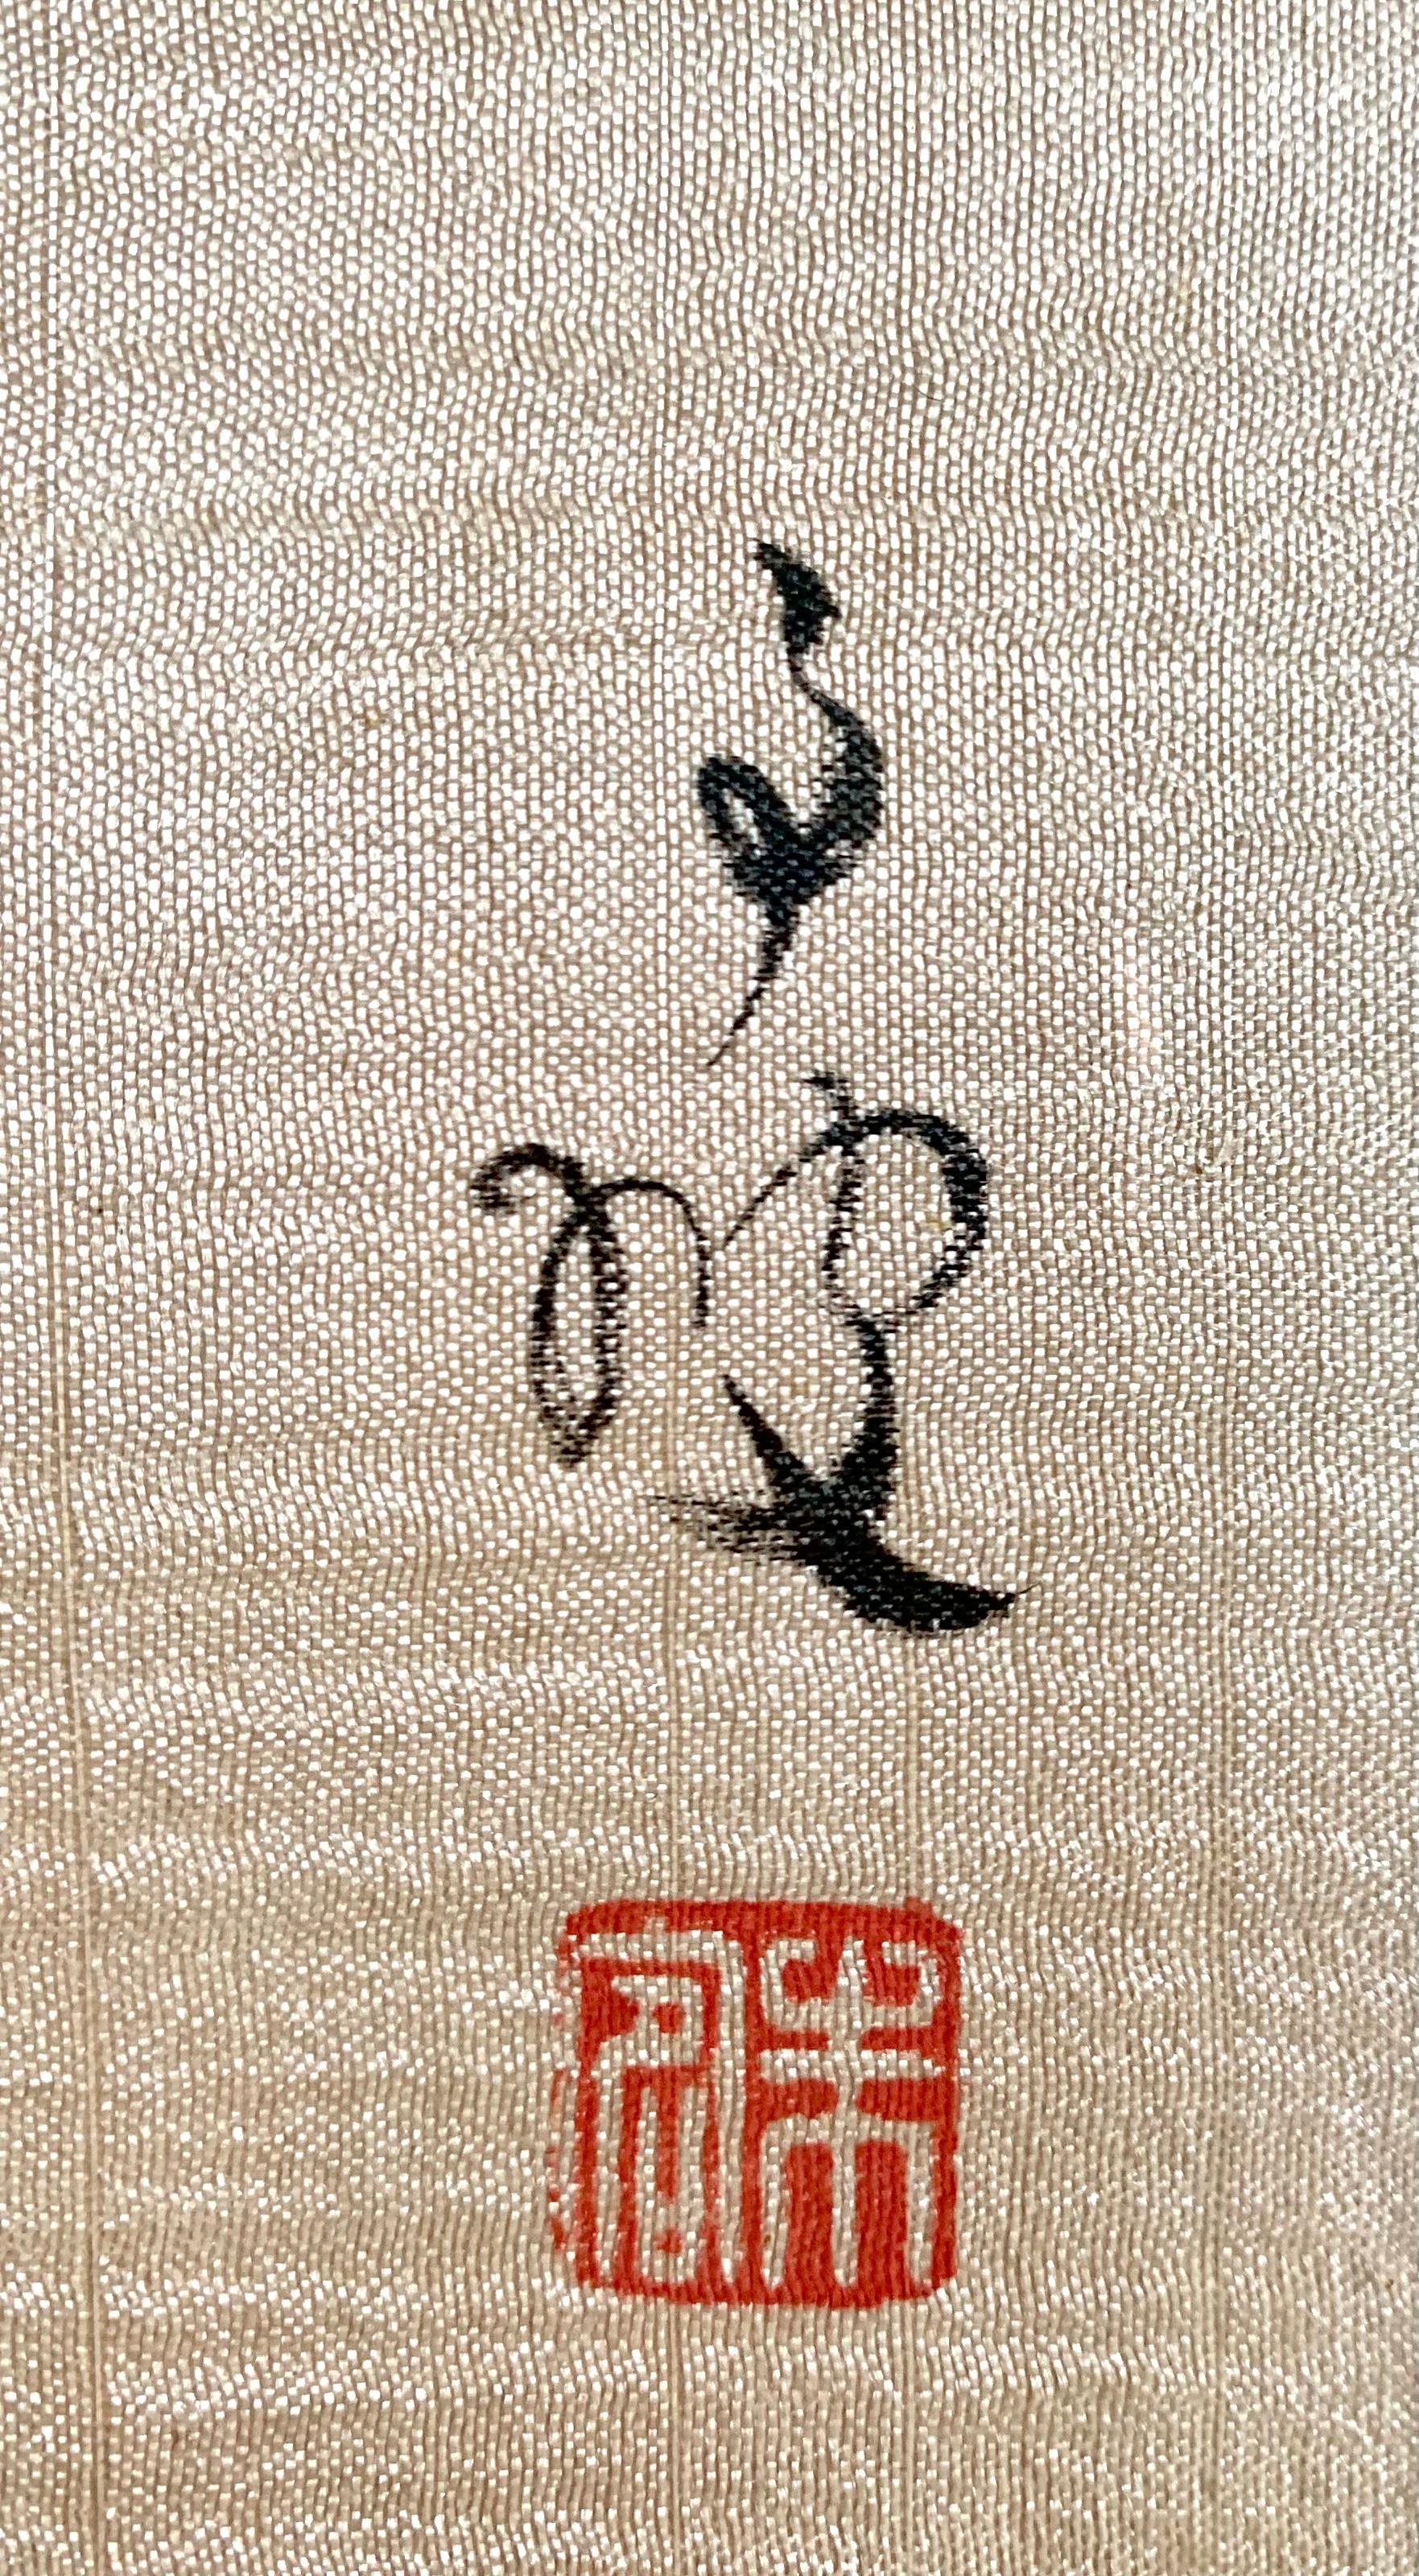 Japanese Bird Painting on Fabric For Sale